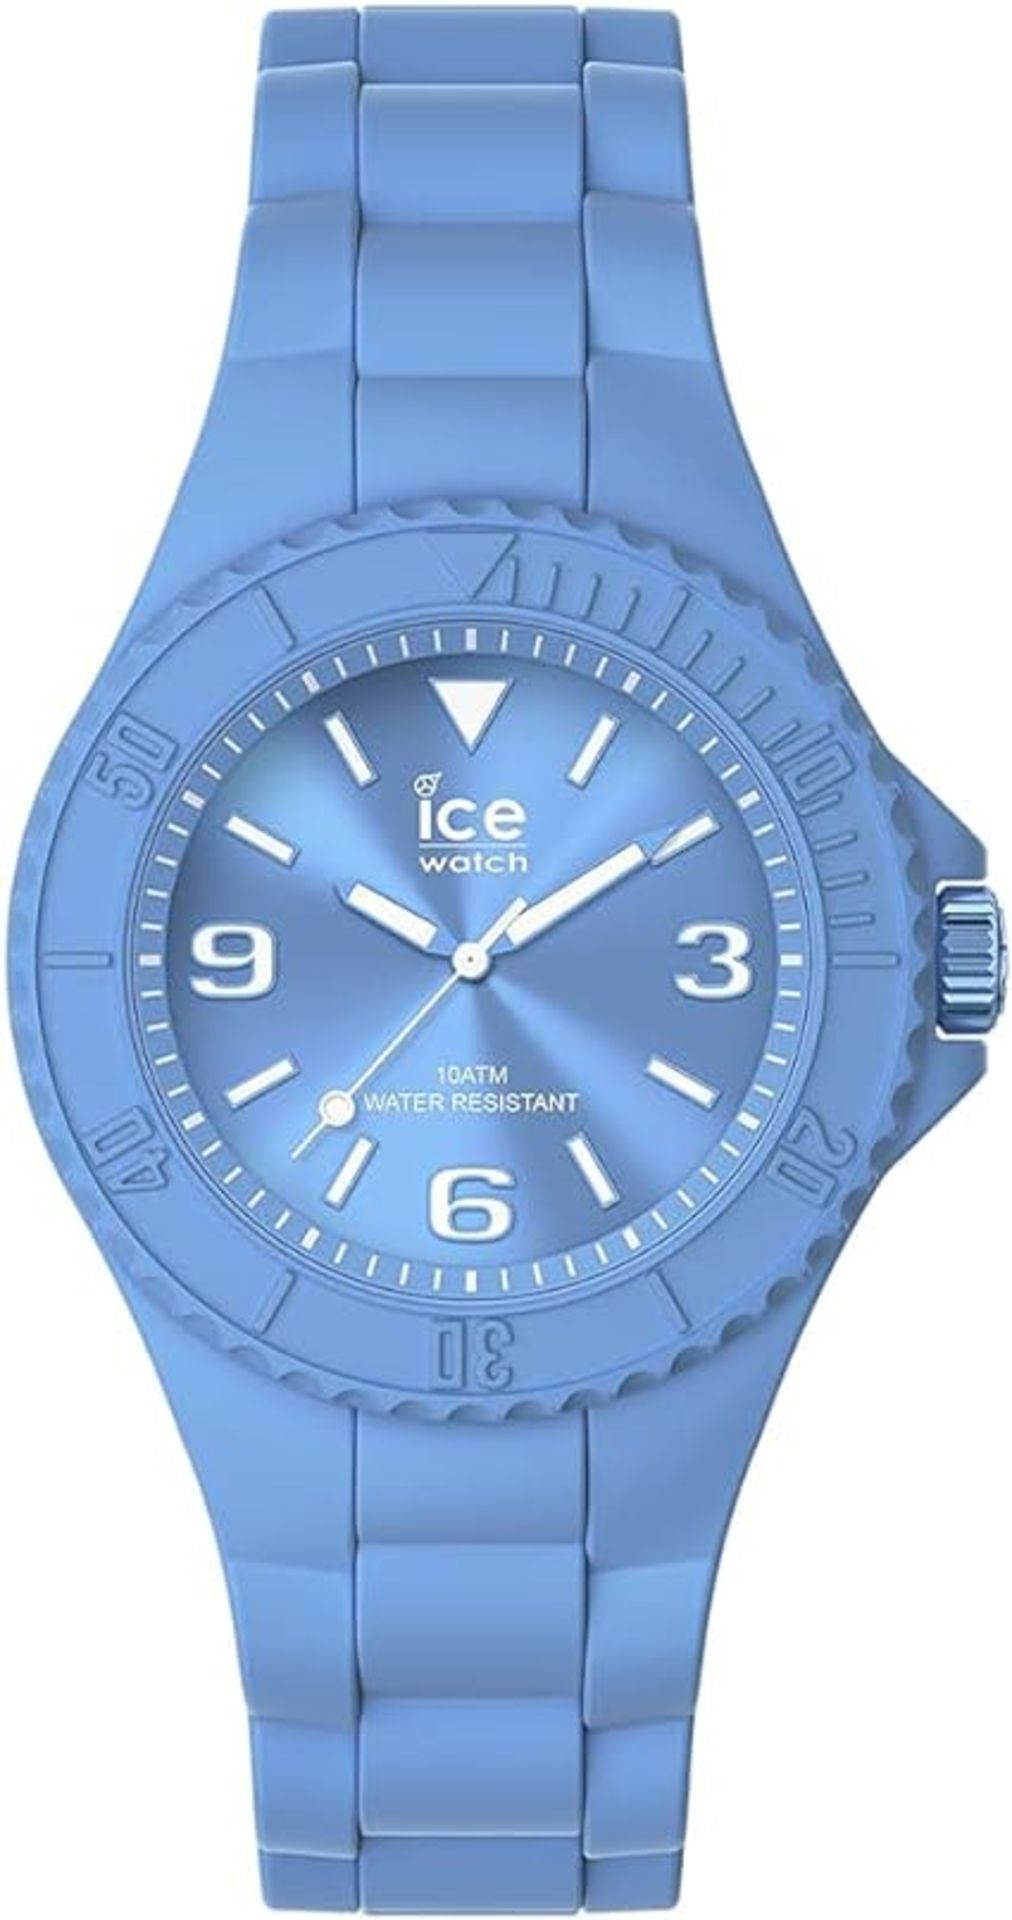 4x BRAND NEW ICE-WATCH Ice Generation Womans Watch. LOTUS BLUE. RRP £55 EACH. (OFC146). Small 35